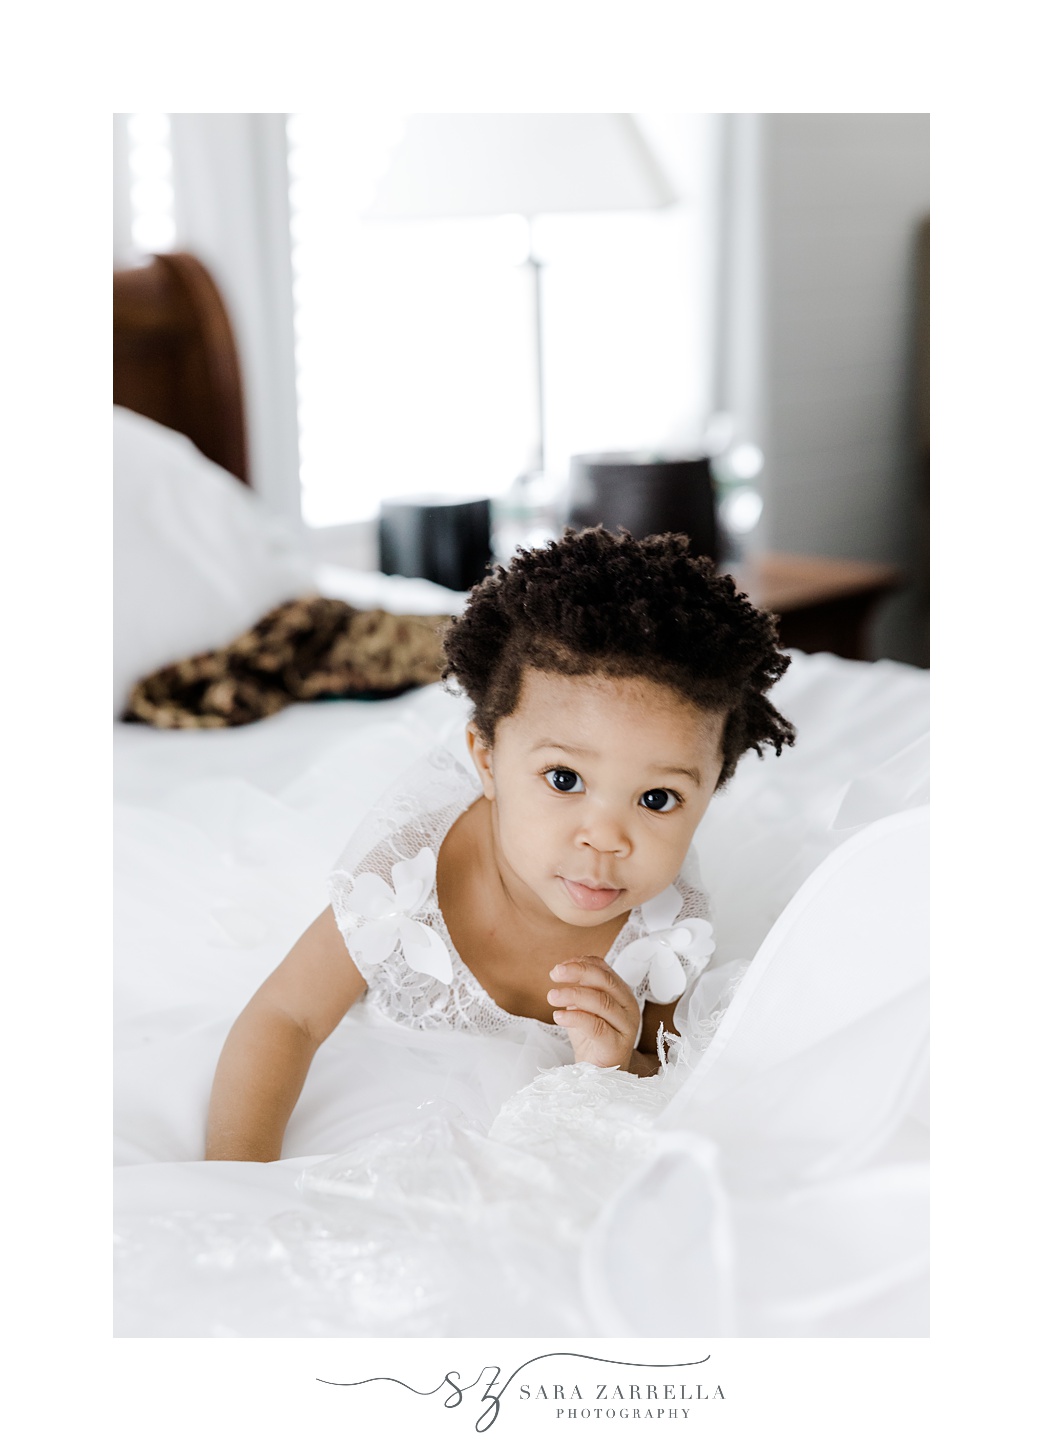 baby girl climbs on bed during wedding prep in Newport RI